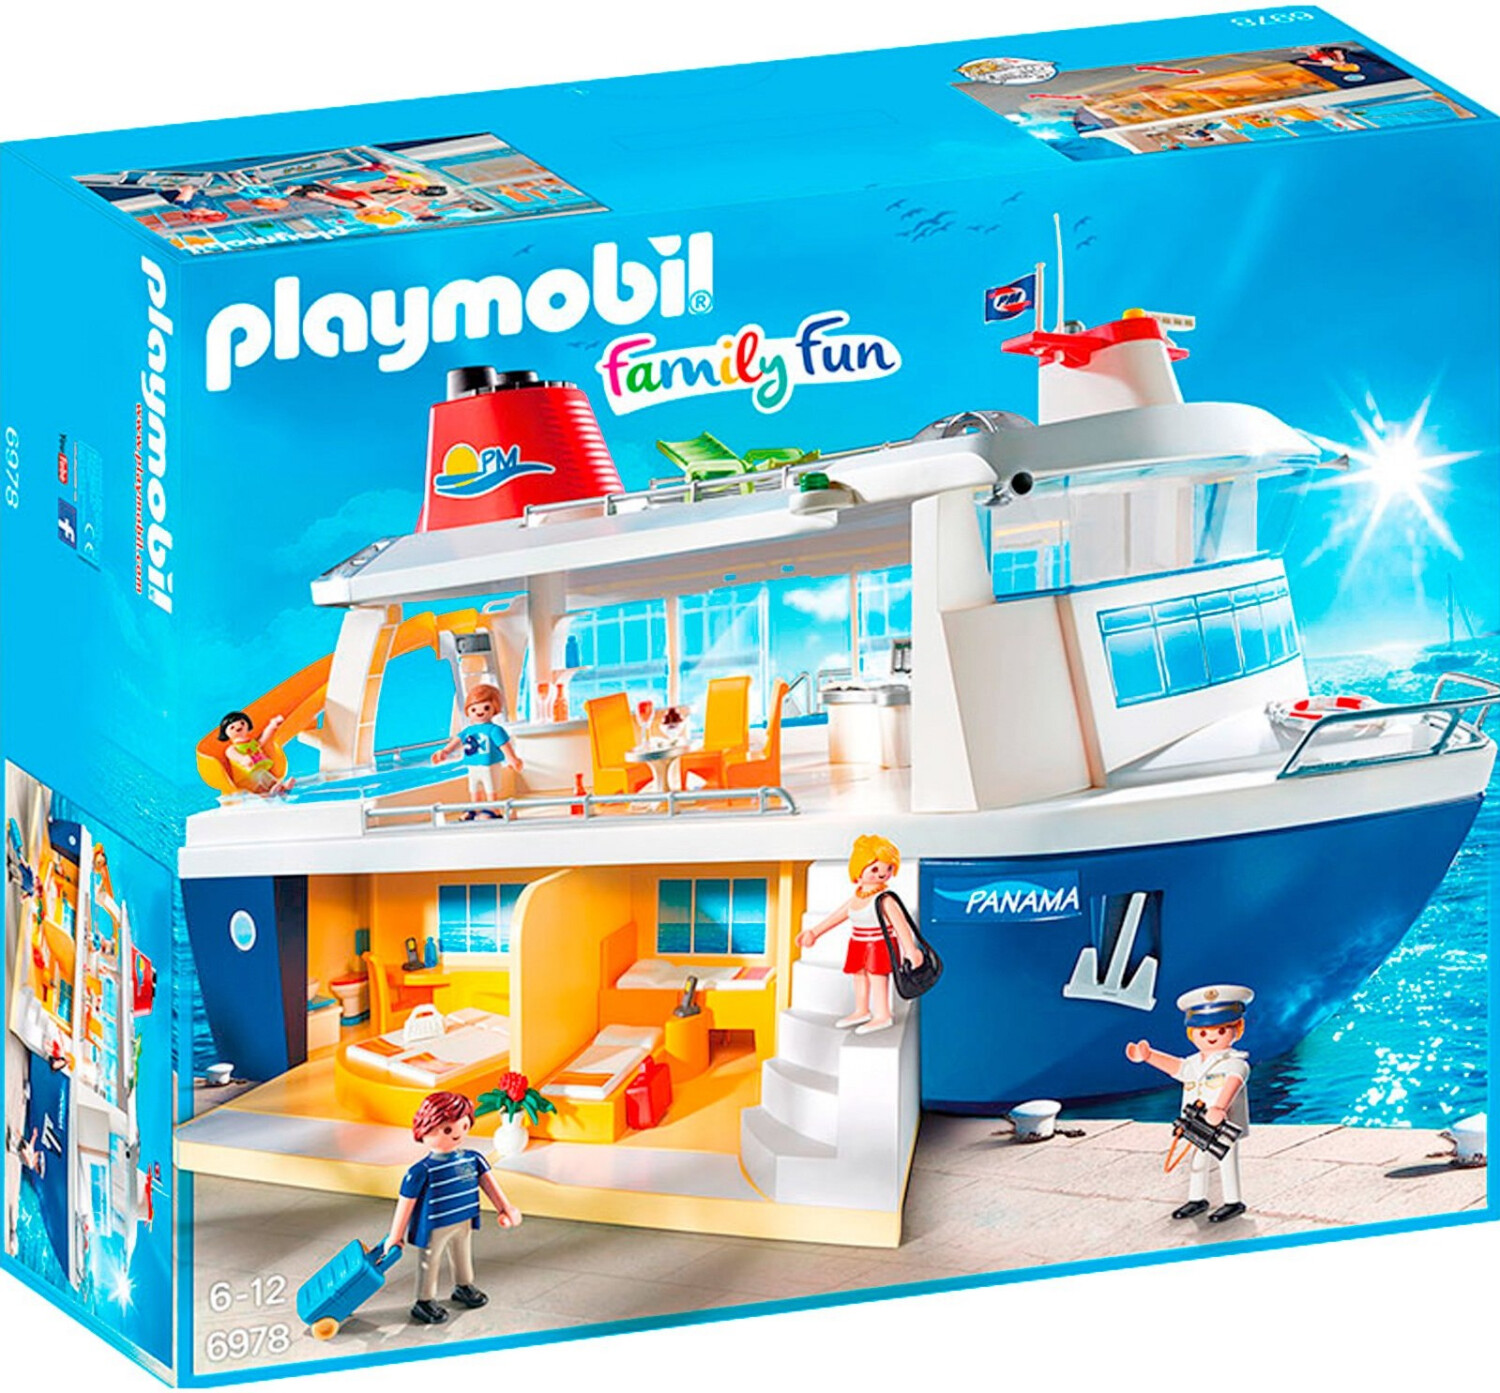 Playmobil Ski Lodge Playset - Imaginative Play for the Whole Family!